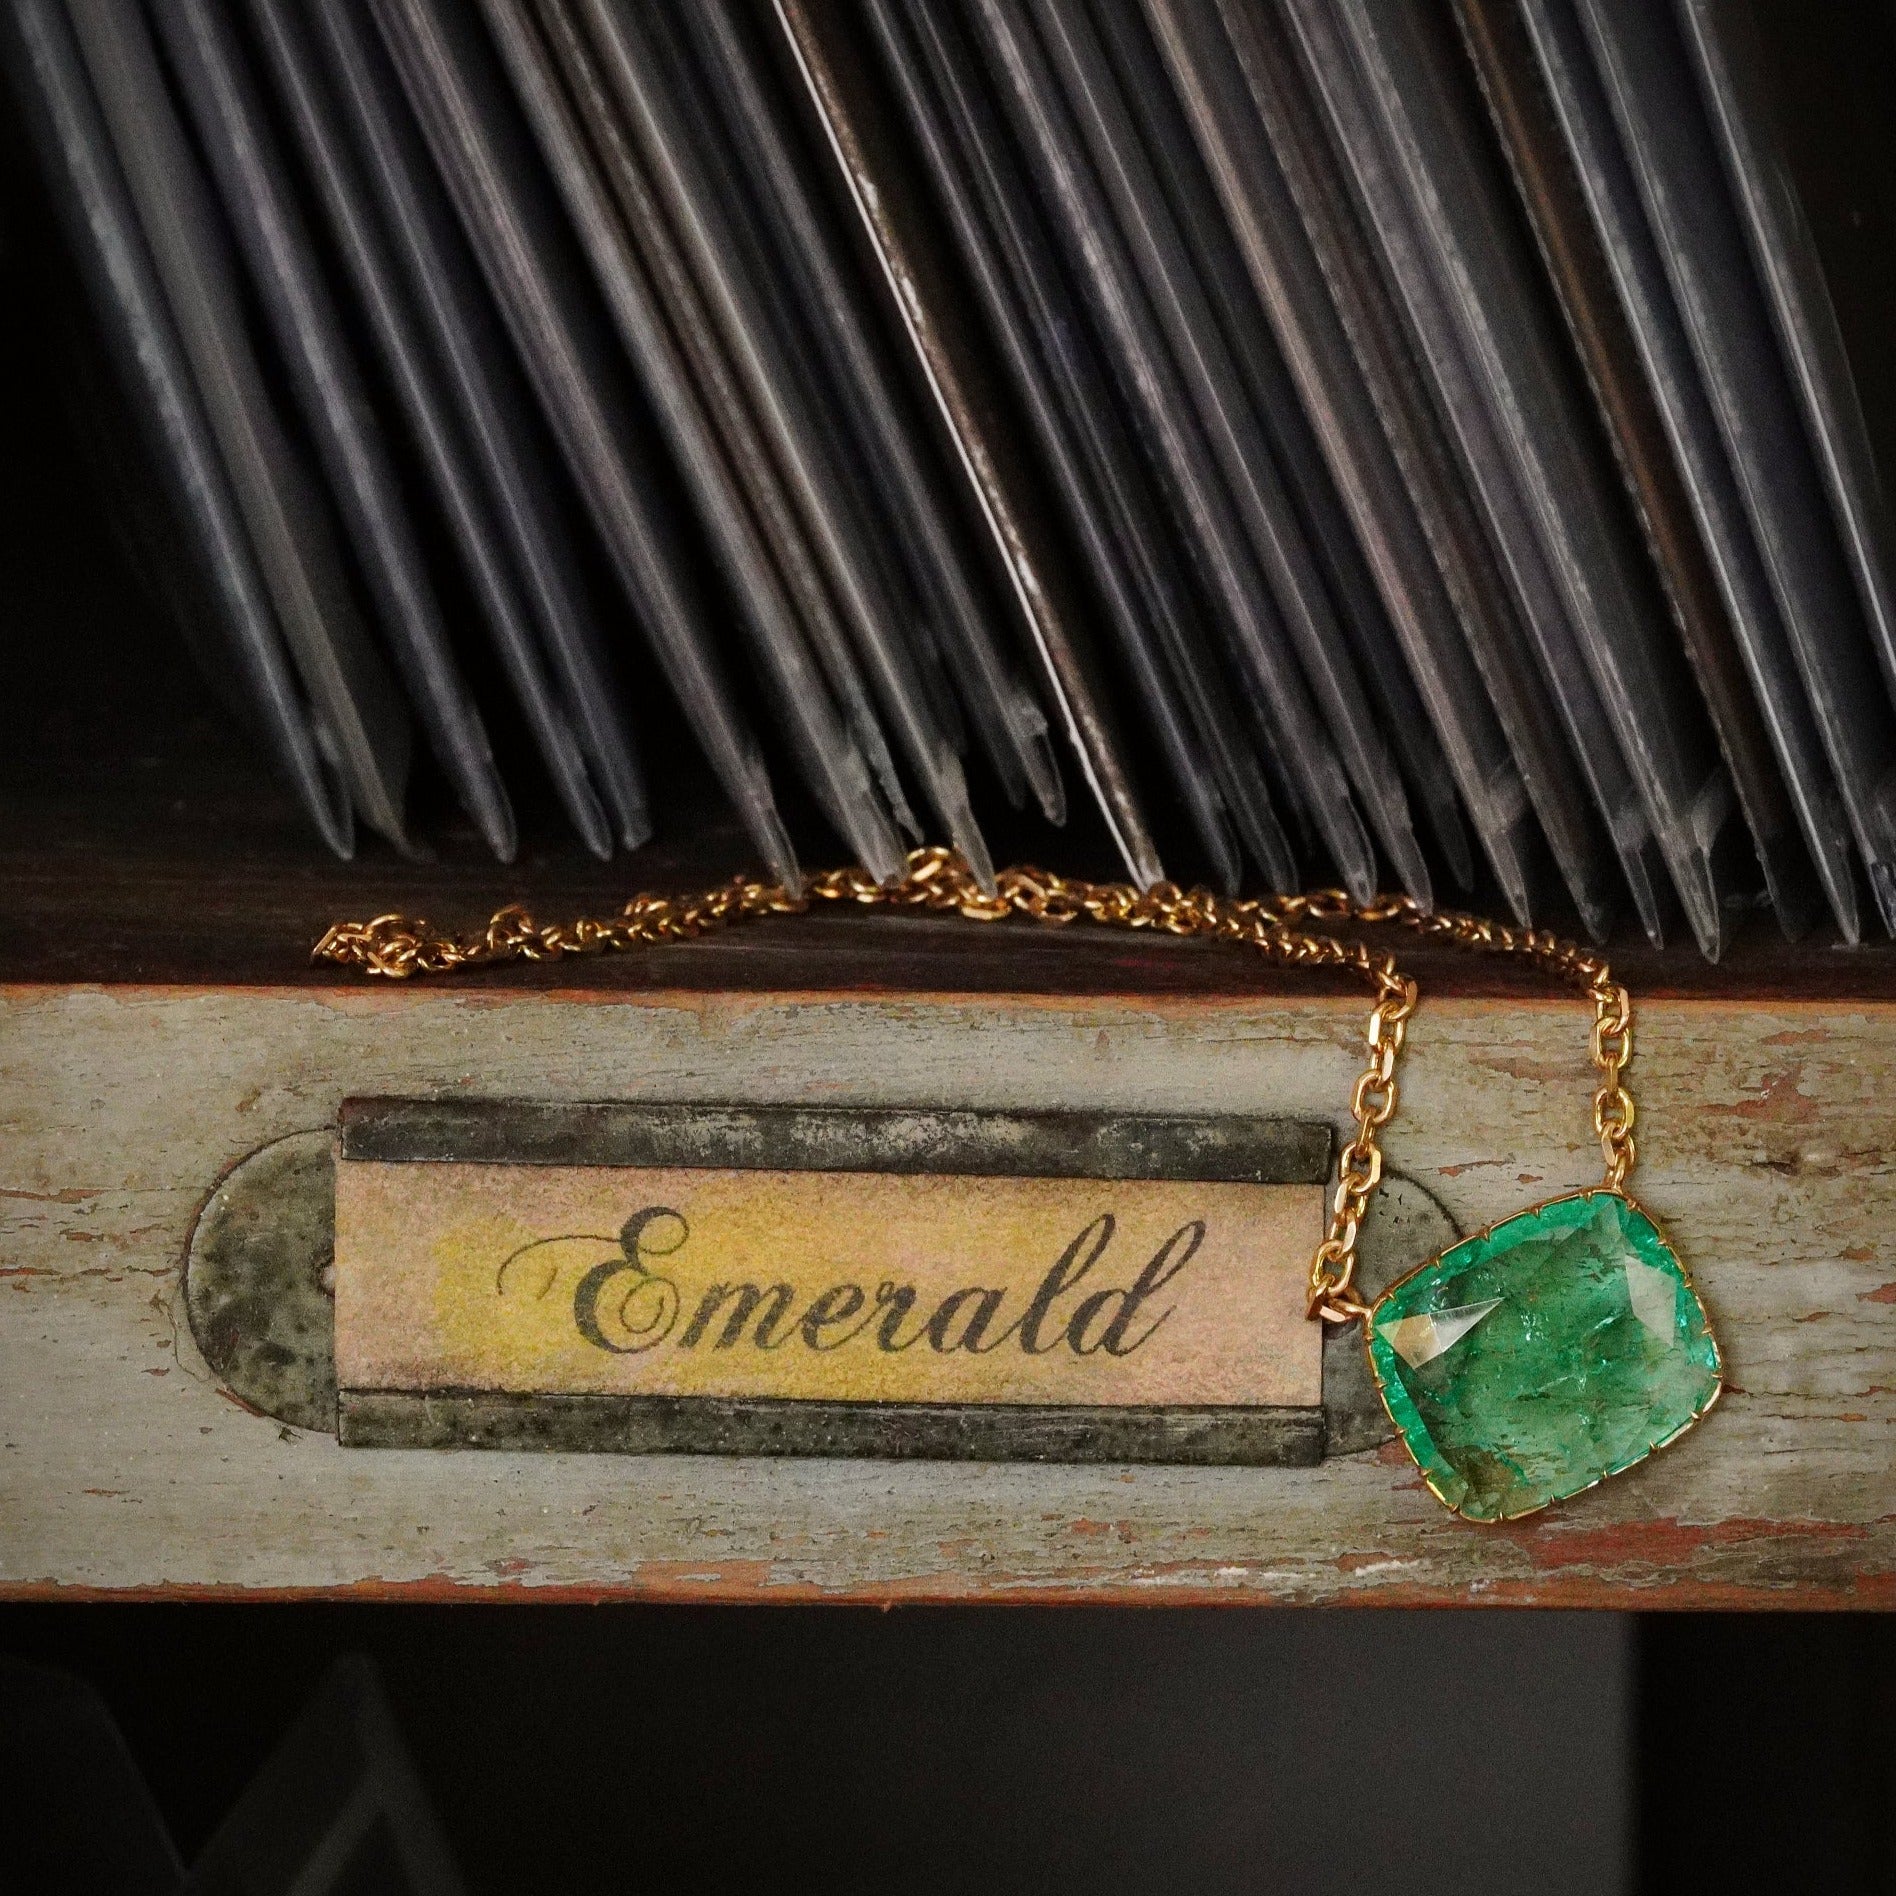 15.34 Carat Colombian Emerald Necklace in 18K Gold